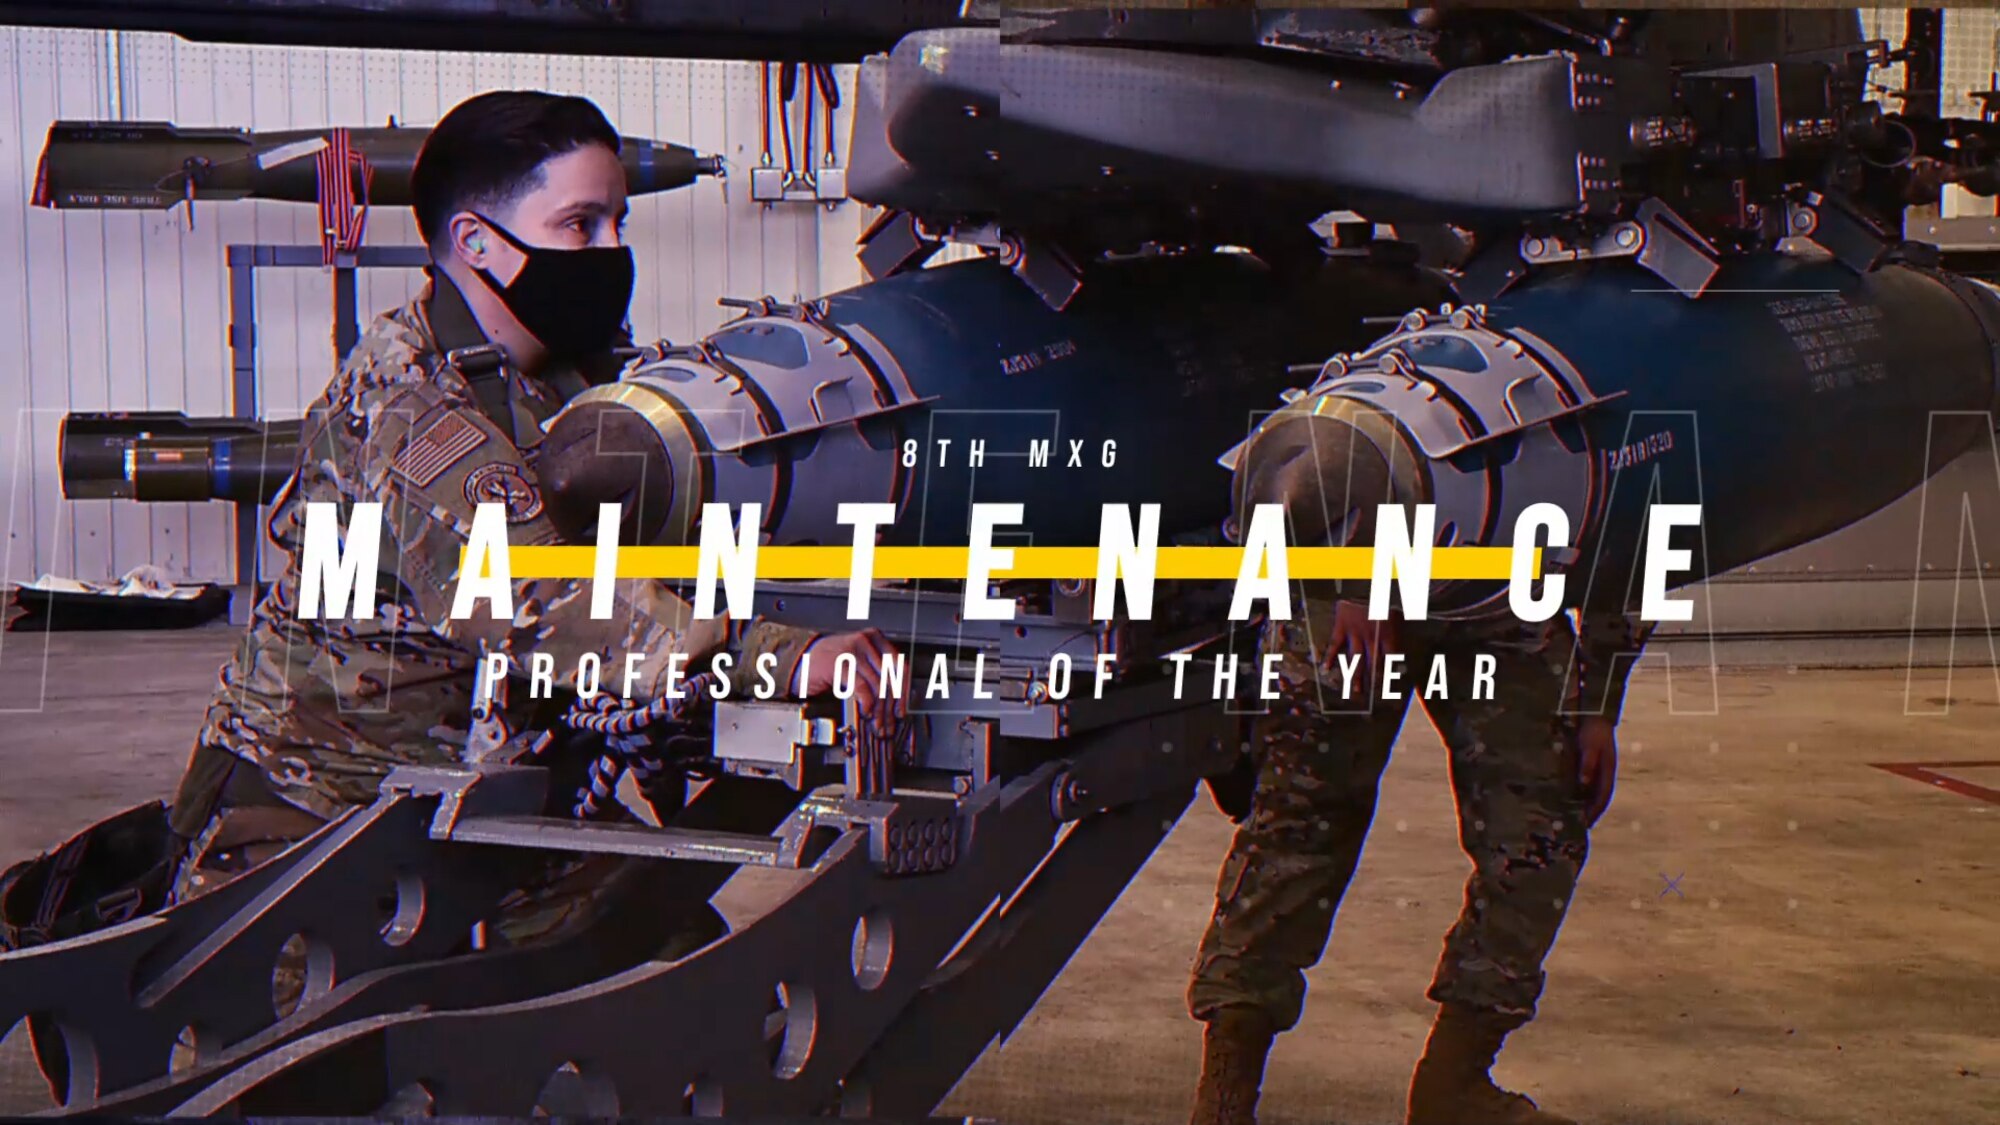 graphic of woman working on a jet. Text that says "8th MXG Maintenance Professional of the Year